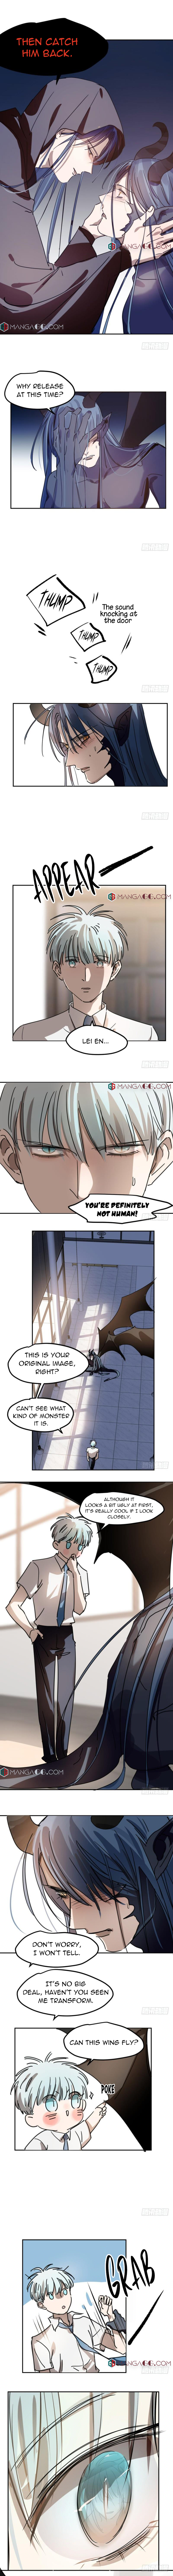 Chasing Ao Ao Chapter 9 - Page 1